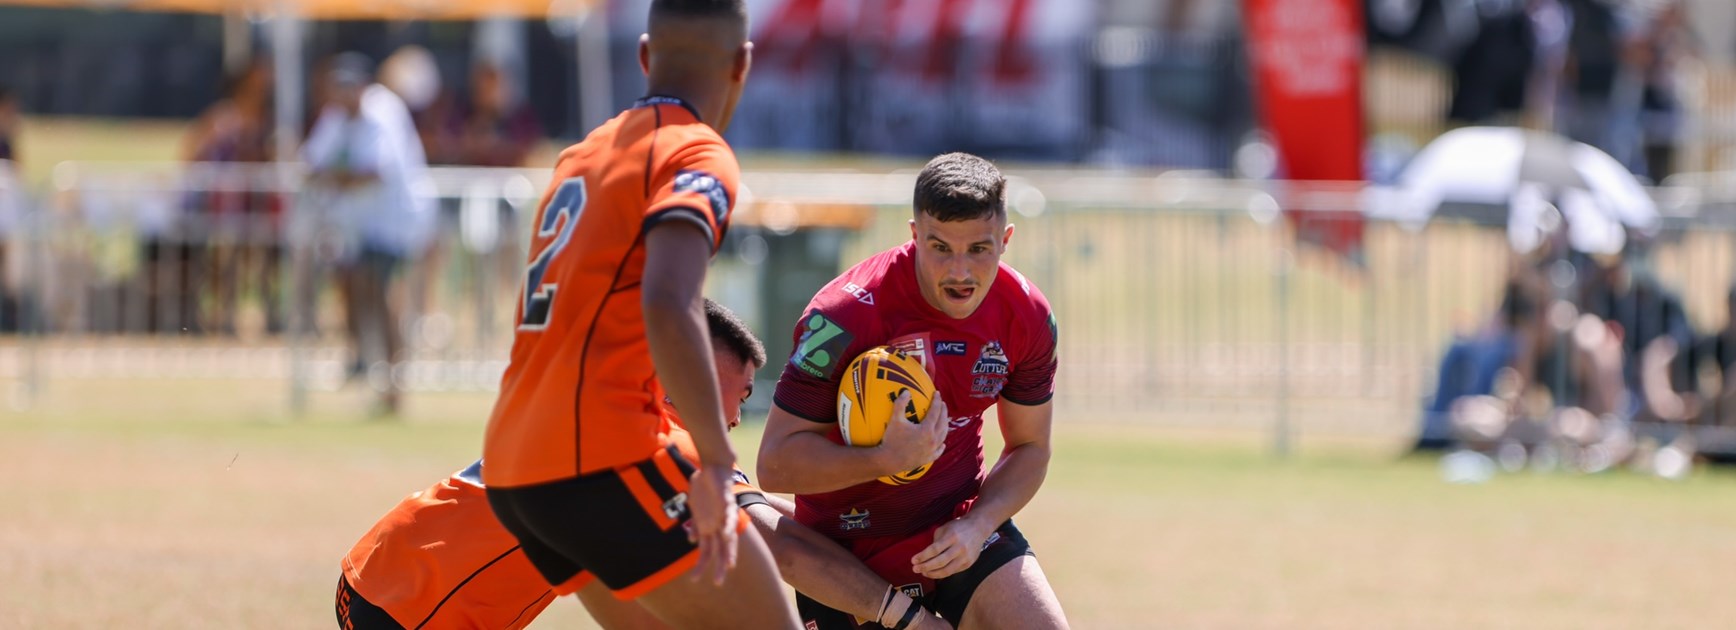 Cutters Colts end Tigers' finals campaign